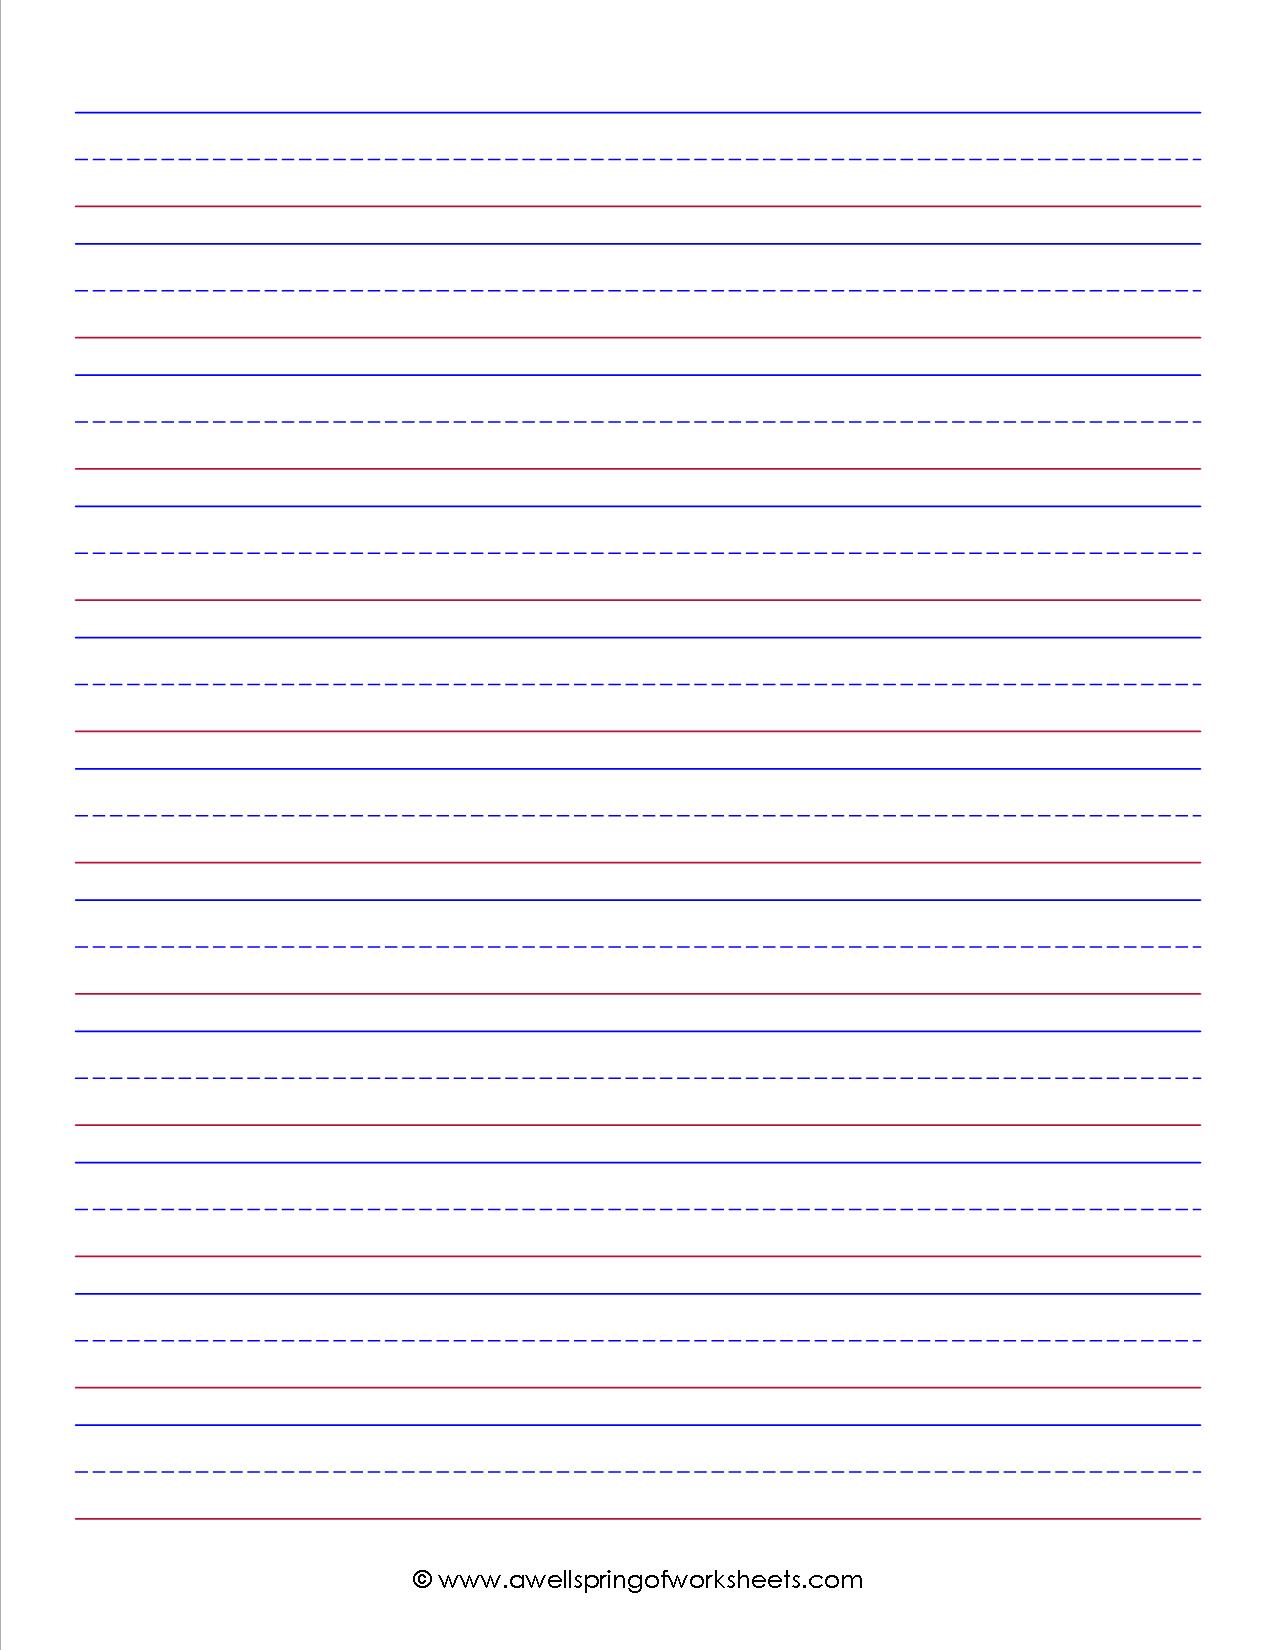 Printable primary lined paper   paging supermom